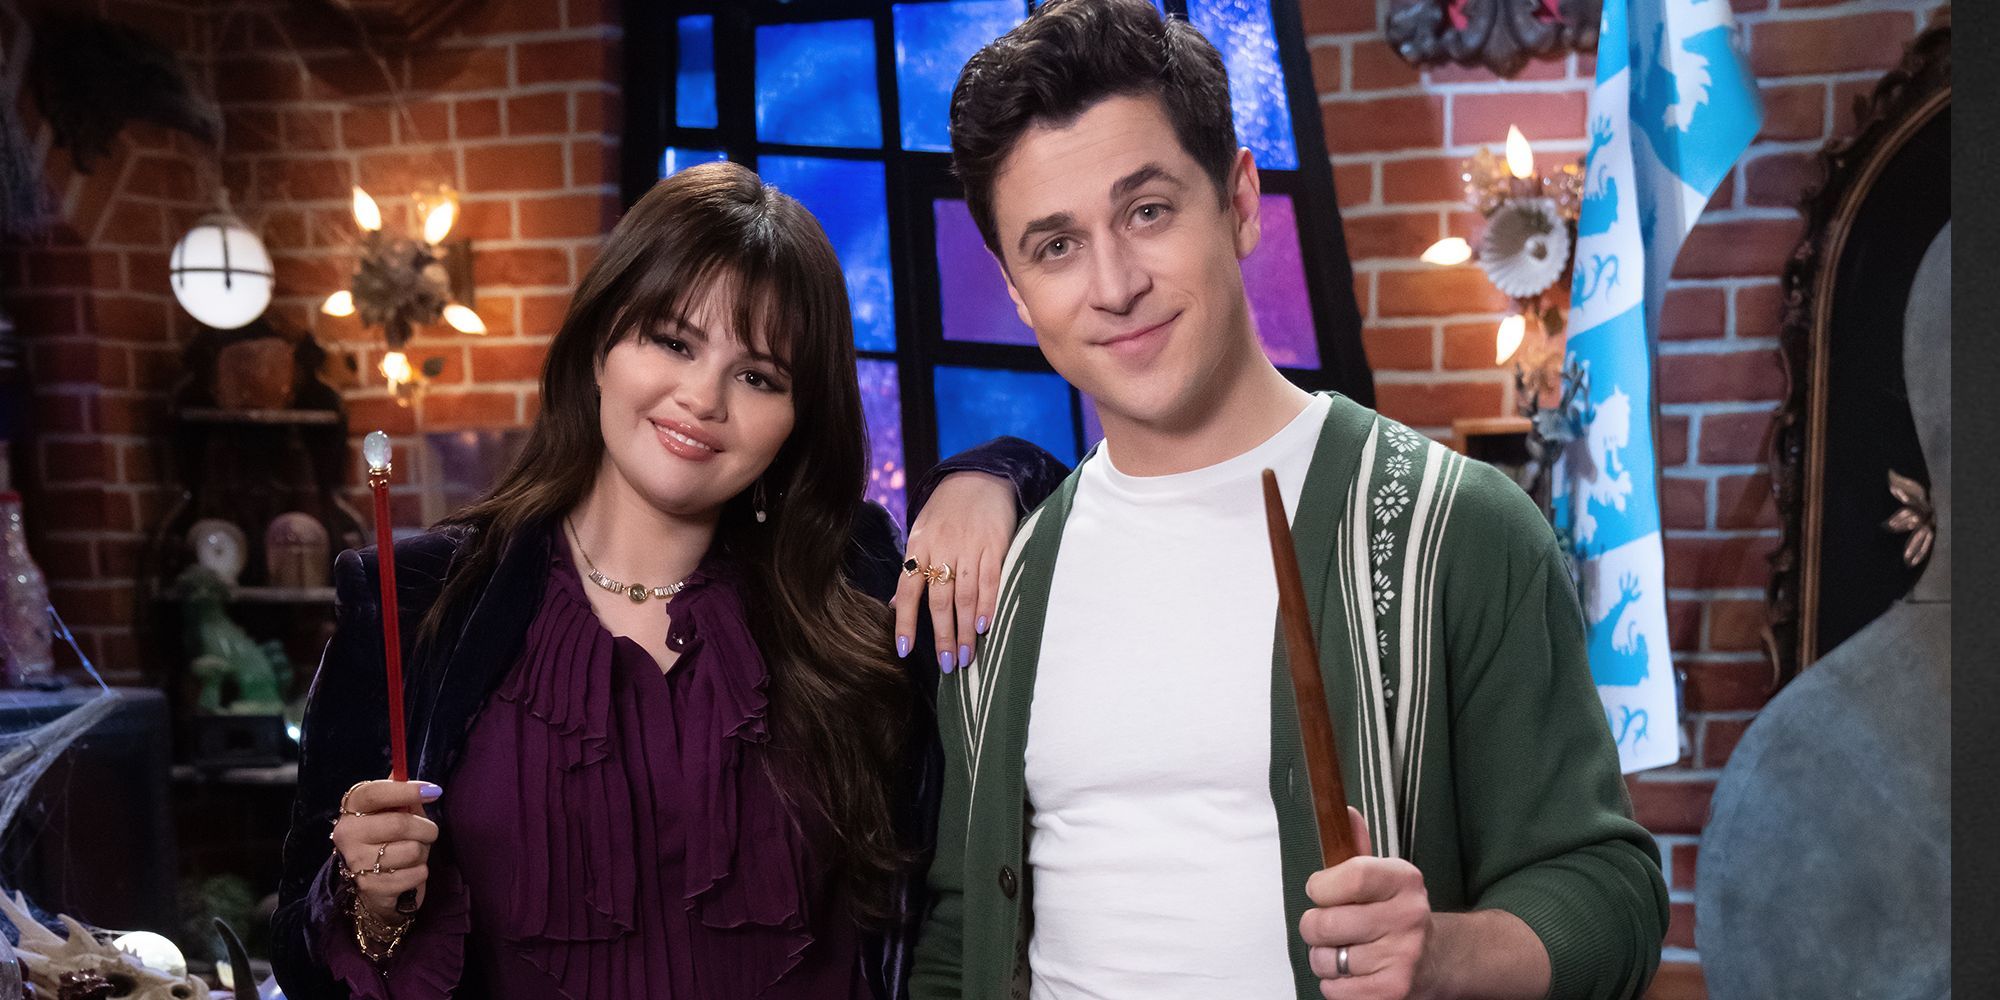 Wizards Of Waverly Place Sequel Series Title & First Look Of Russo Family Revealed